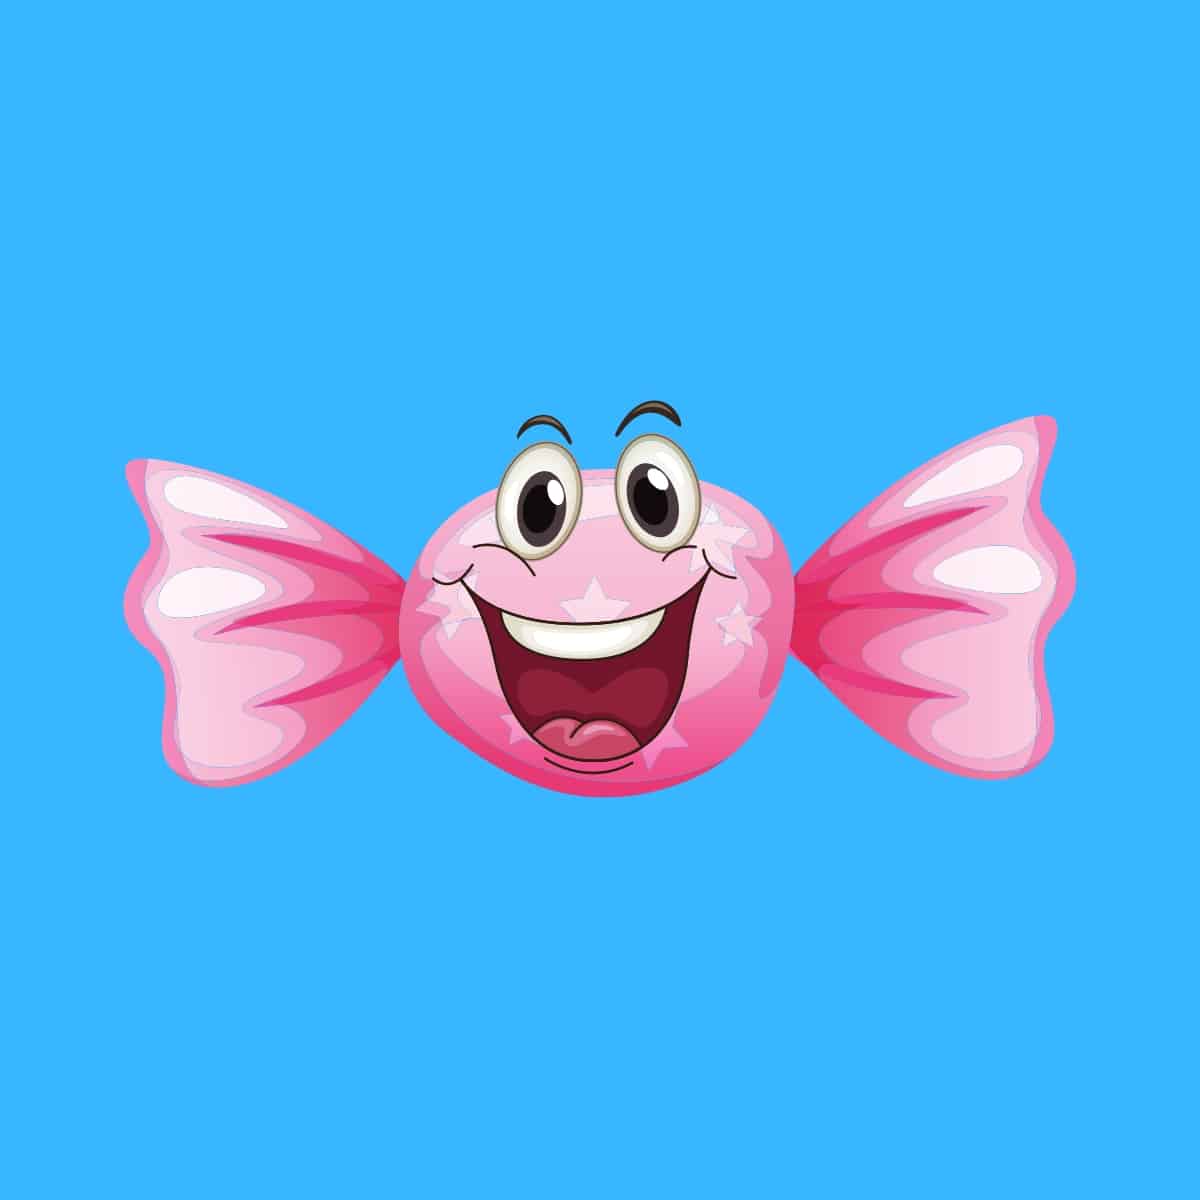 Cartoon graphic of a smiling candy on blue background.